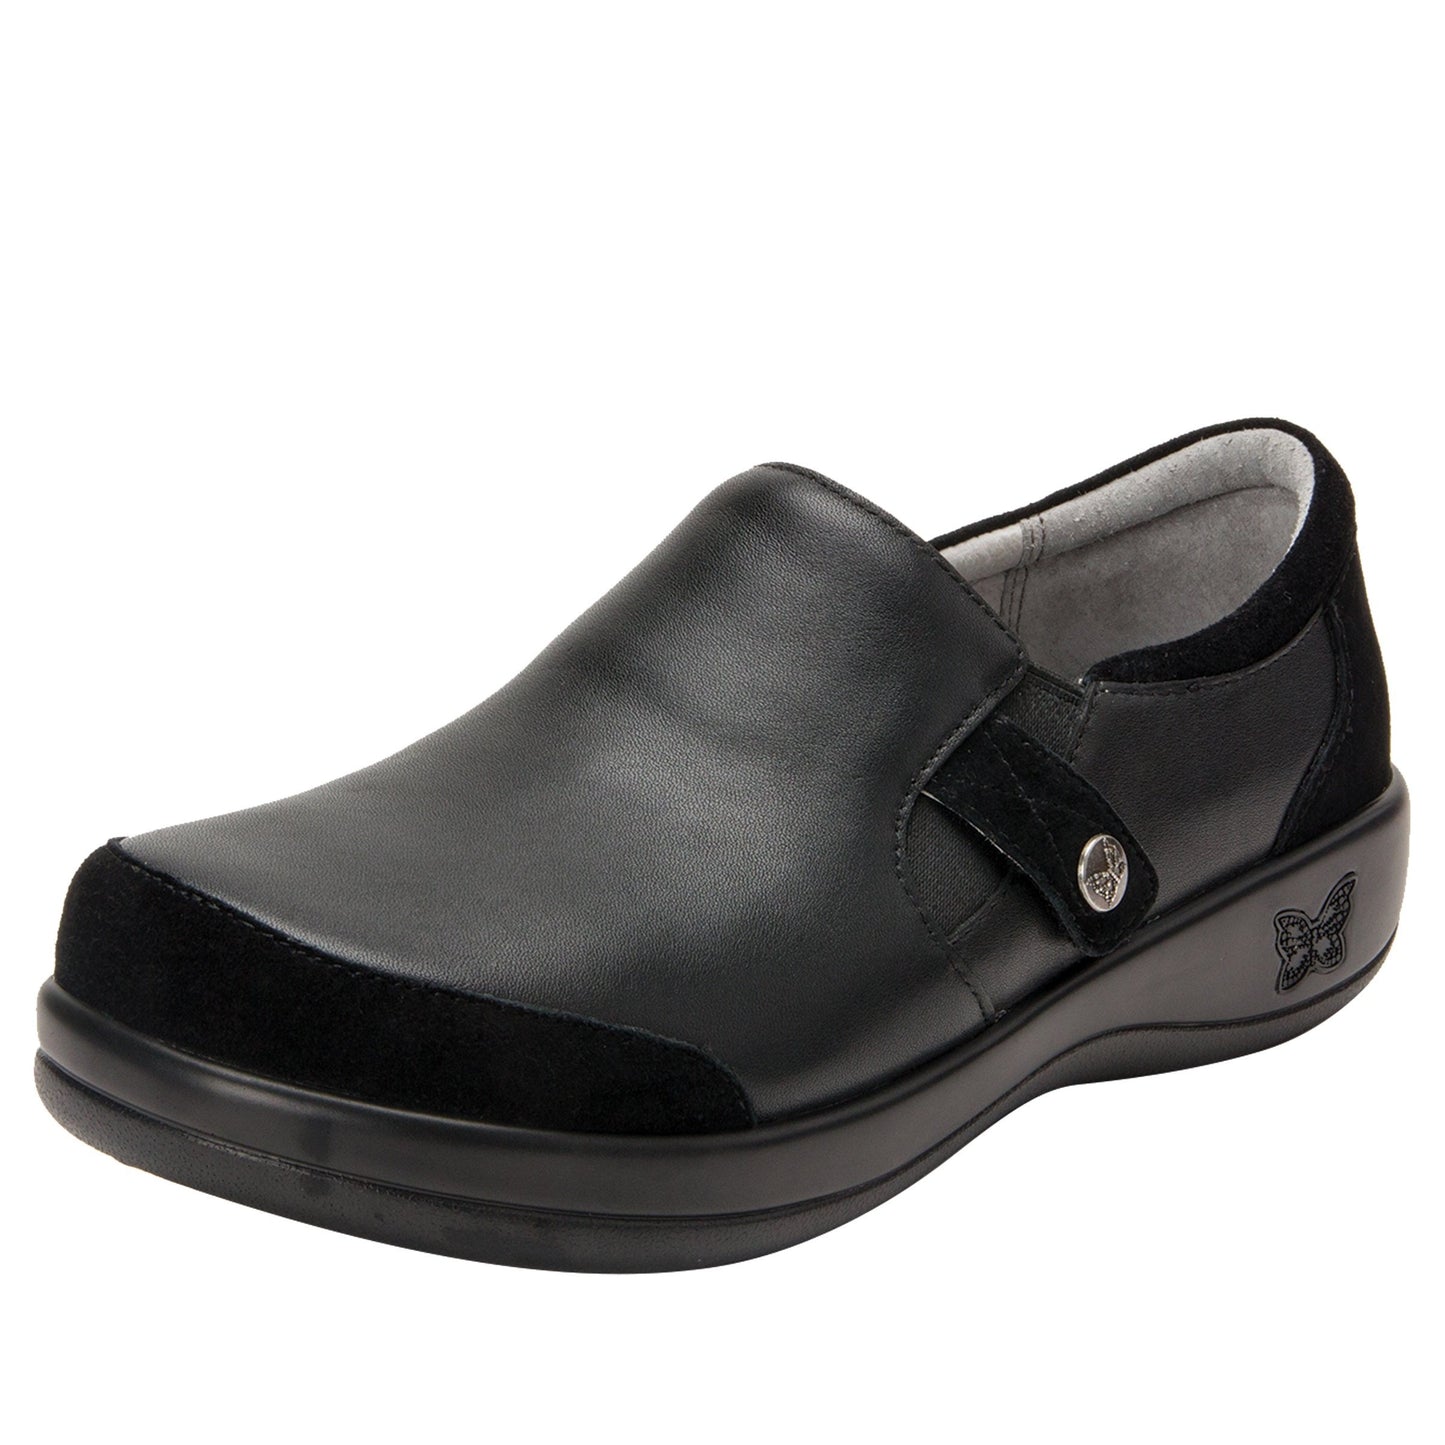 Alegria Sale Shoe Size 37 Paityn in Black at Parker's Clothing and Shoes.